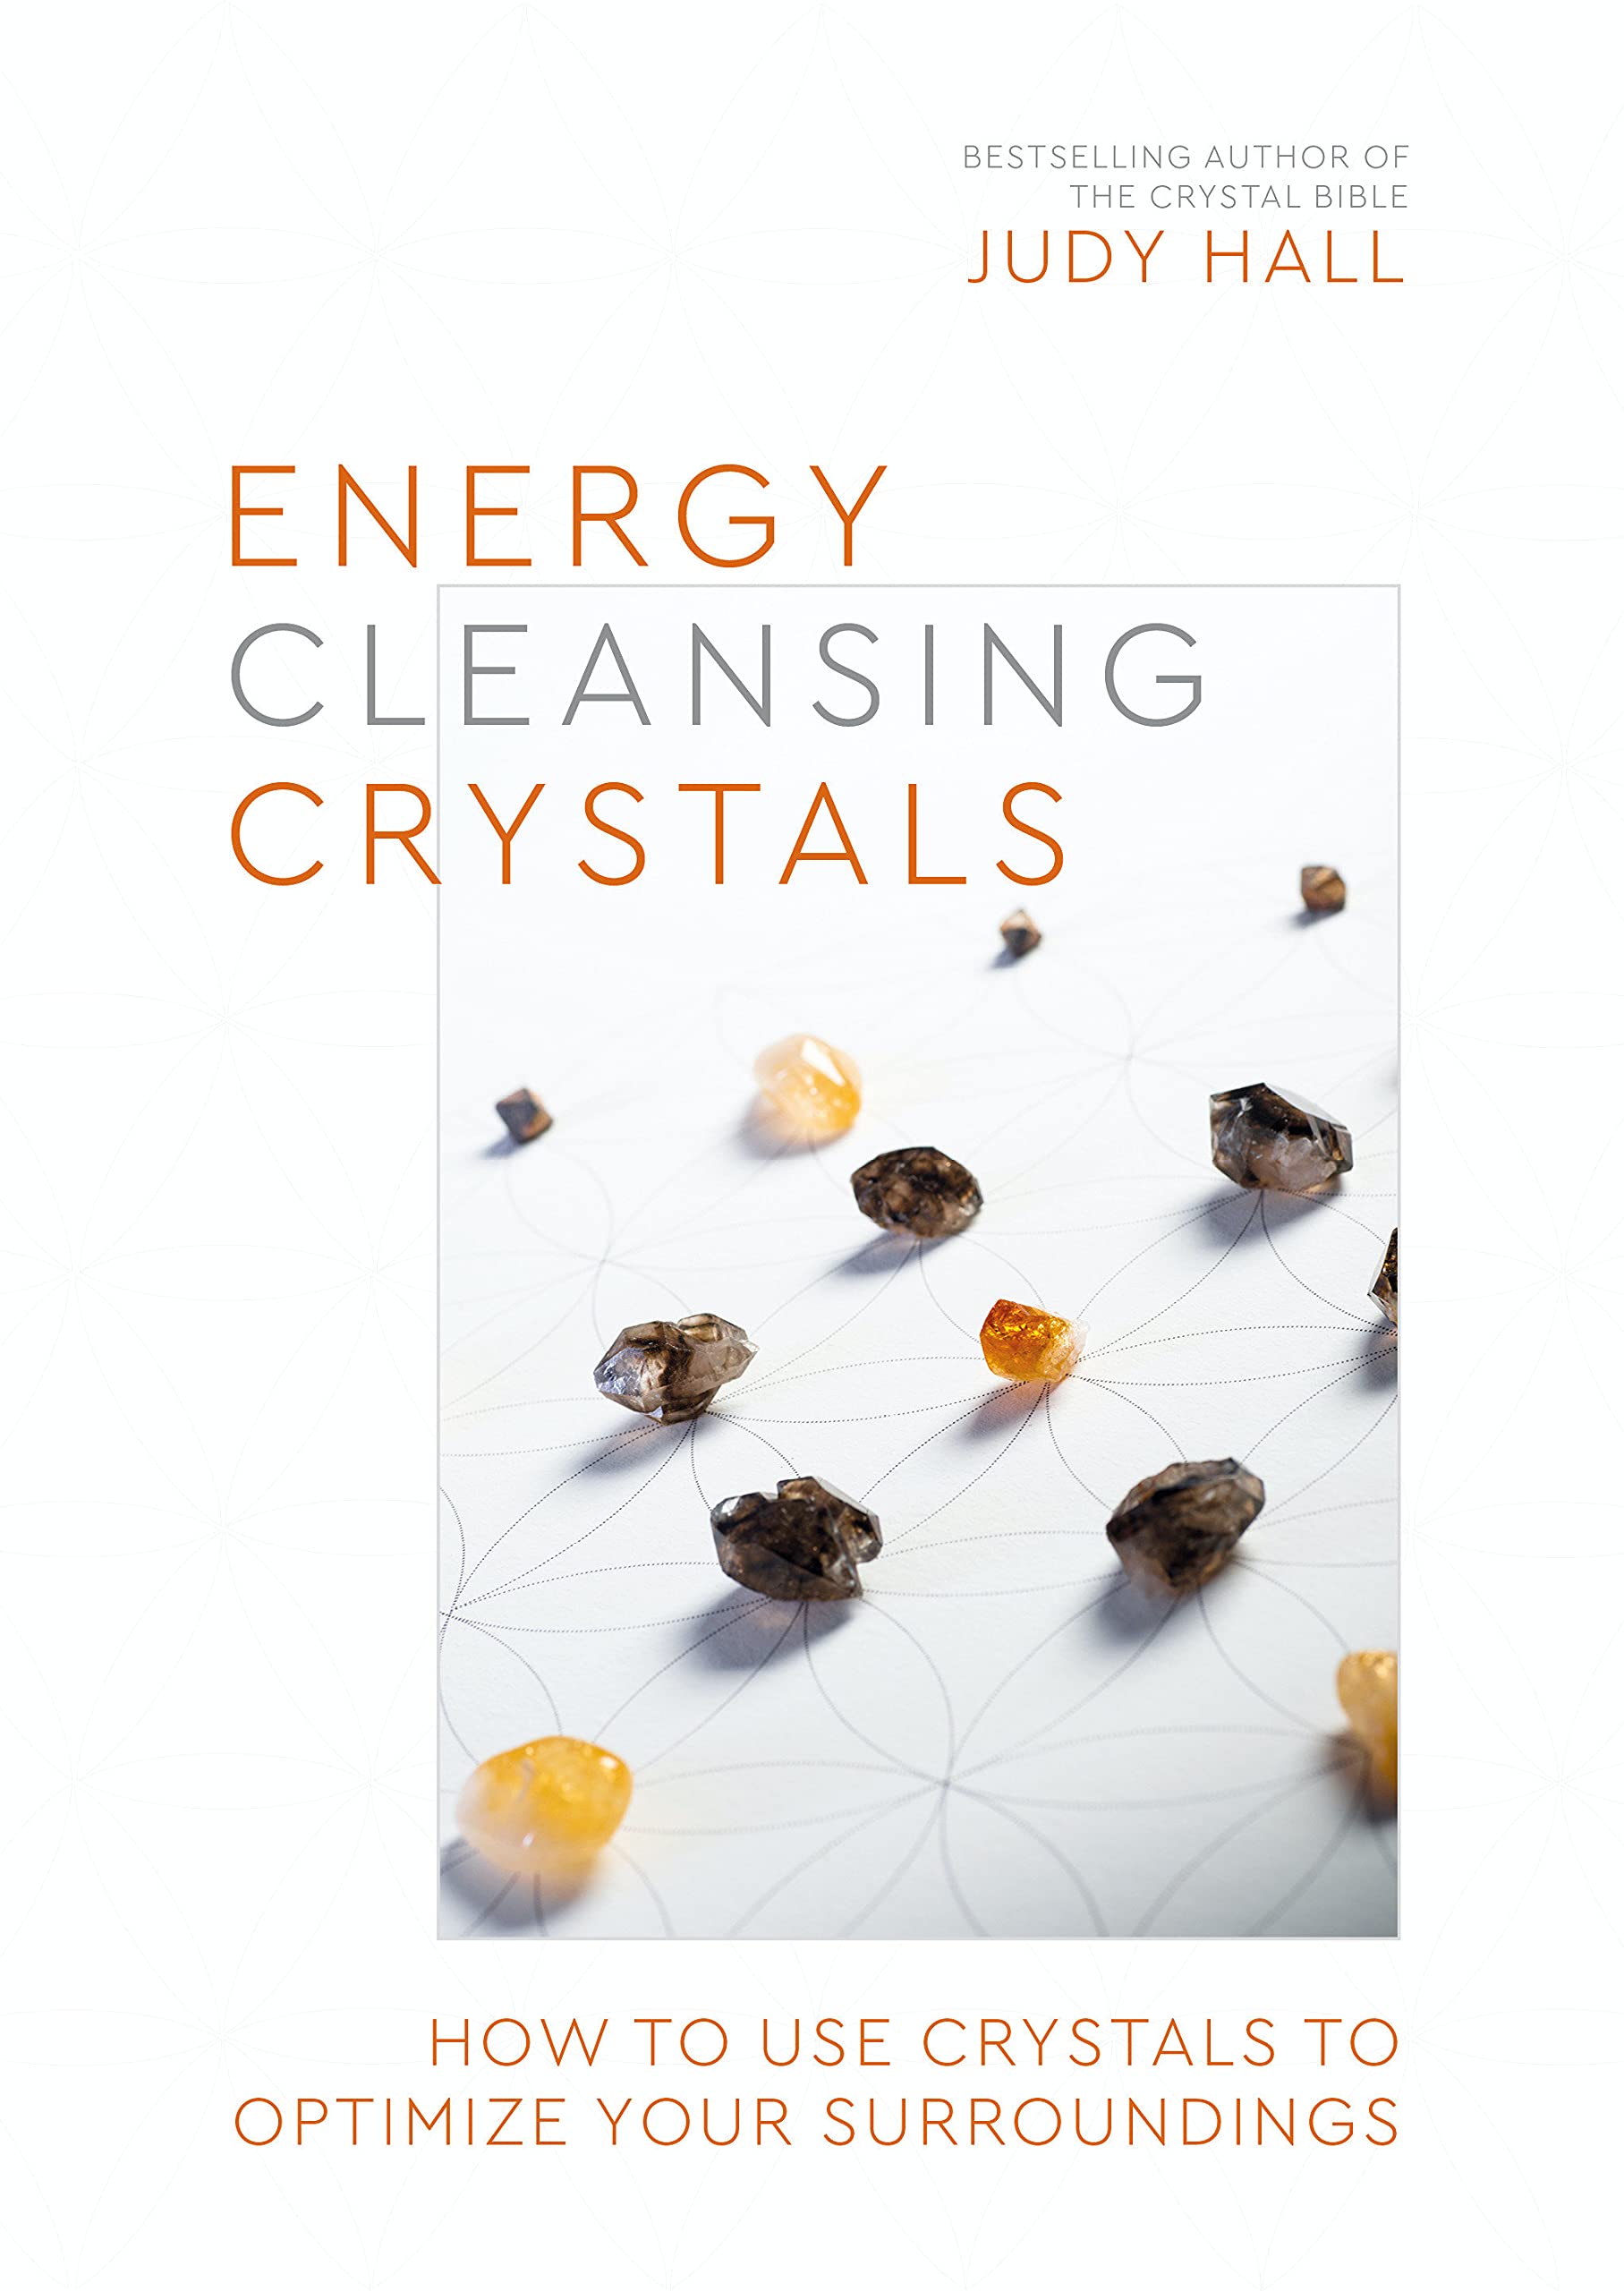 Energy-Cleansing Crystals: How to Use Crystals to Optimize Your Surroundings by Judy Hall